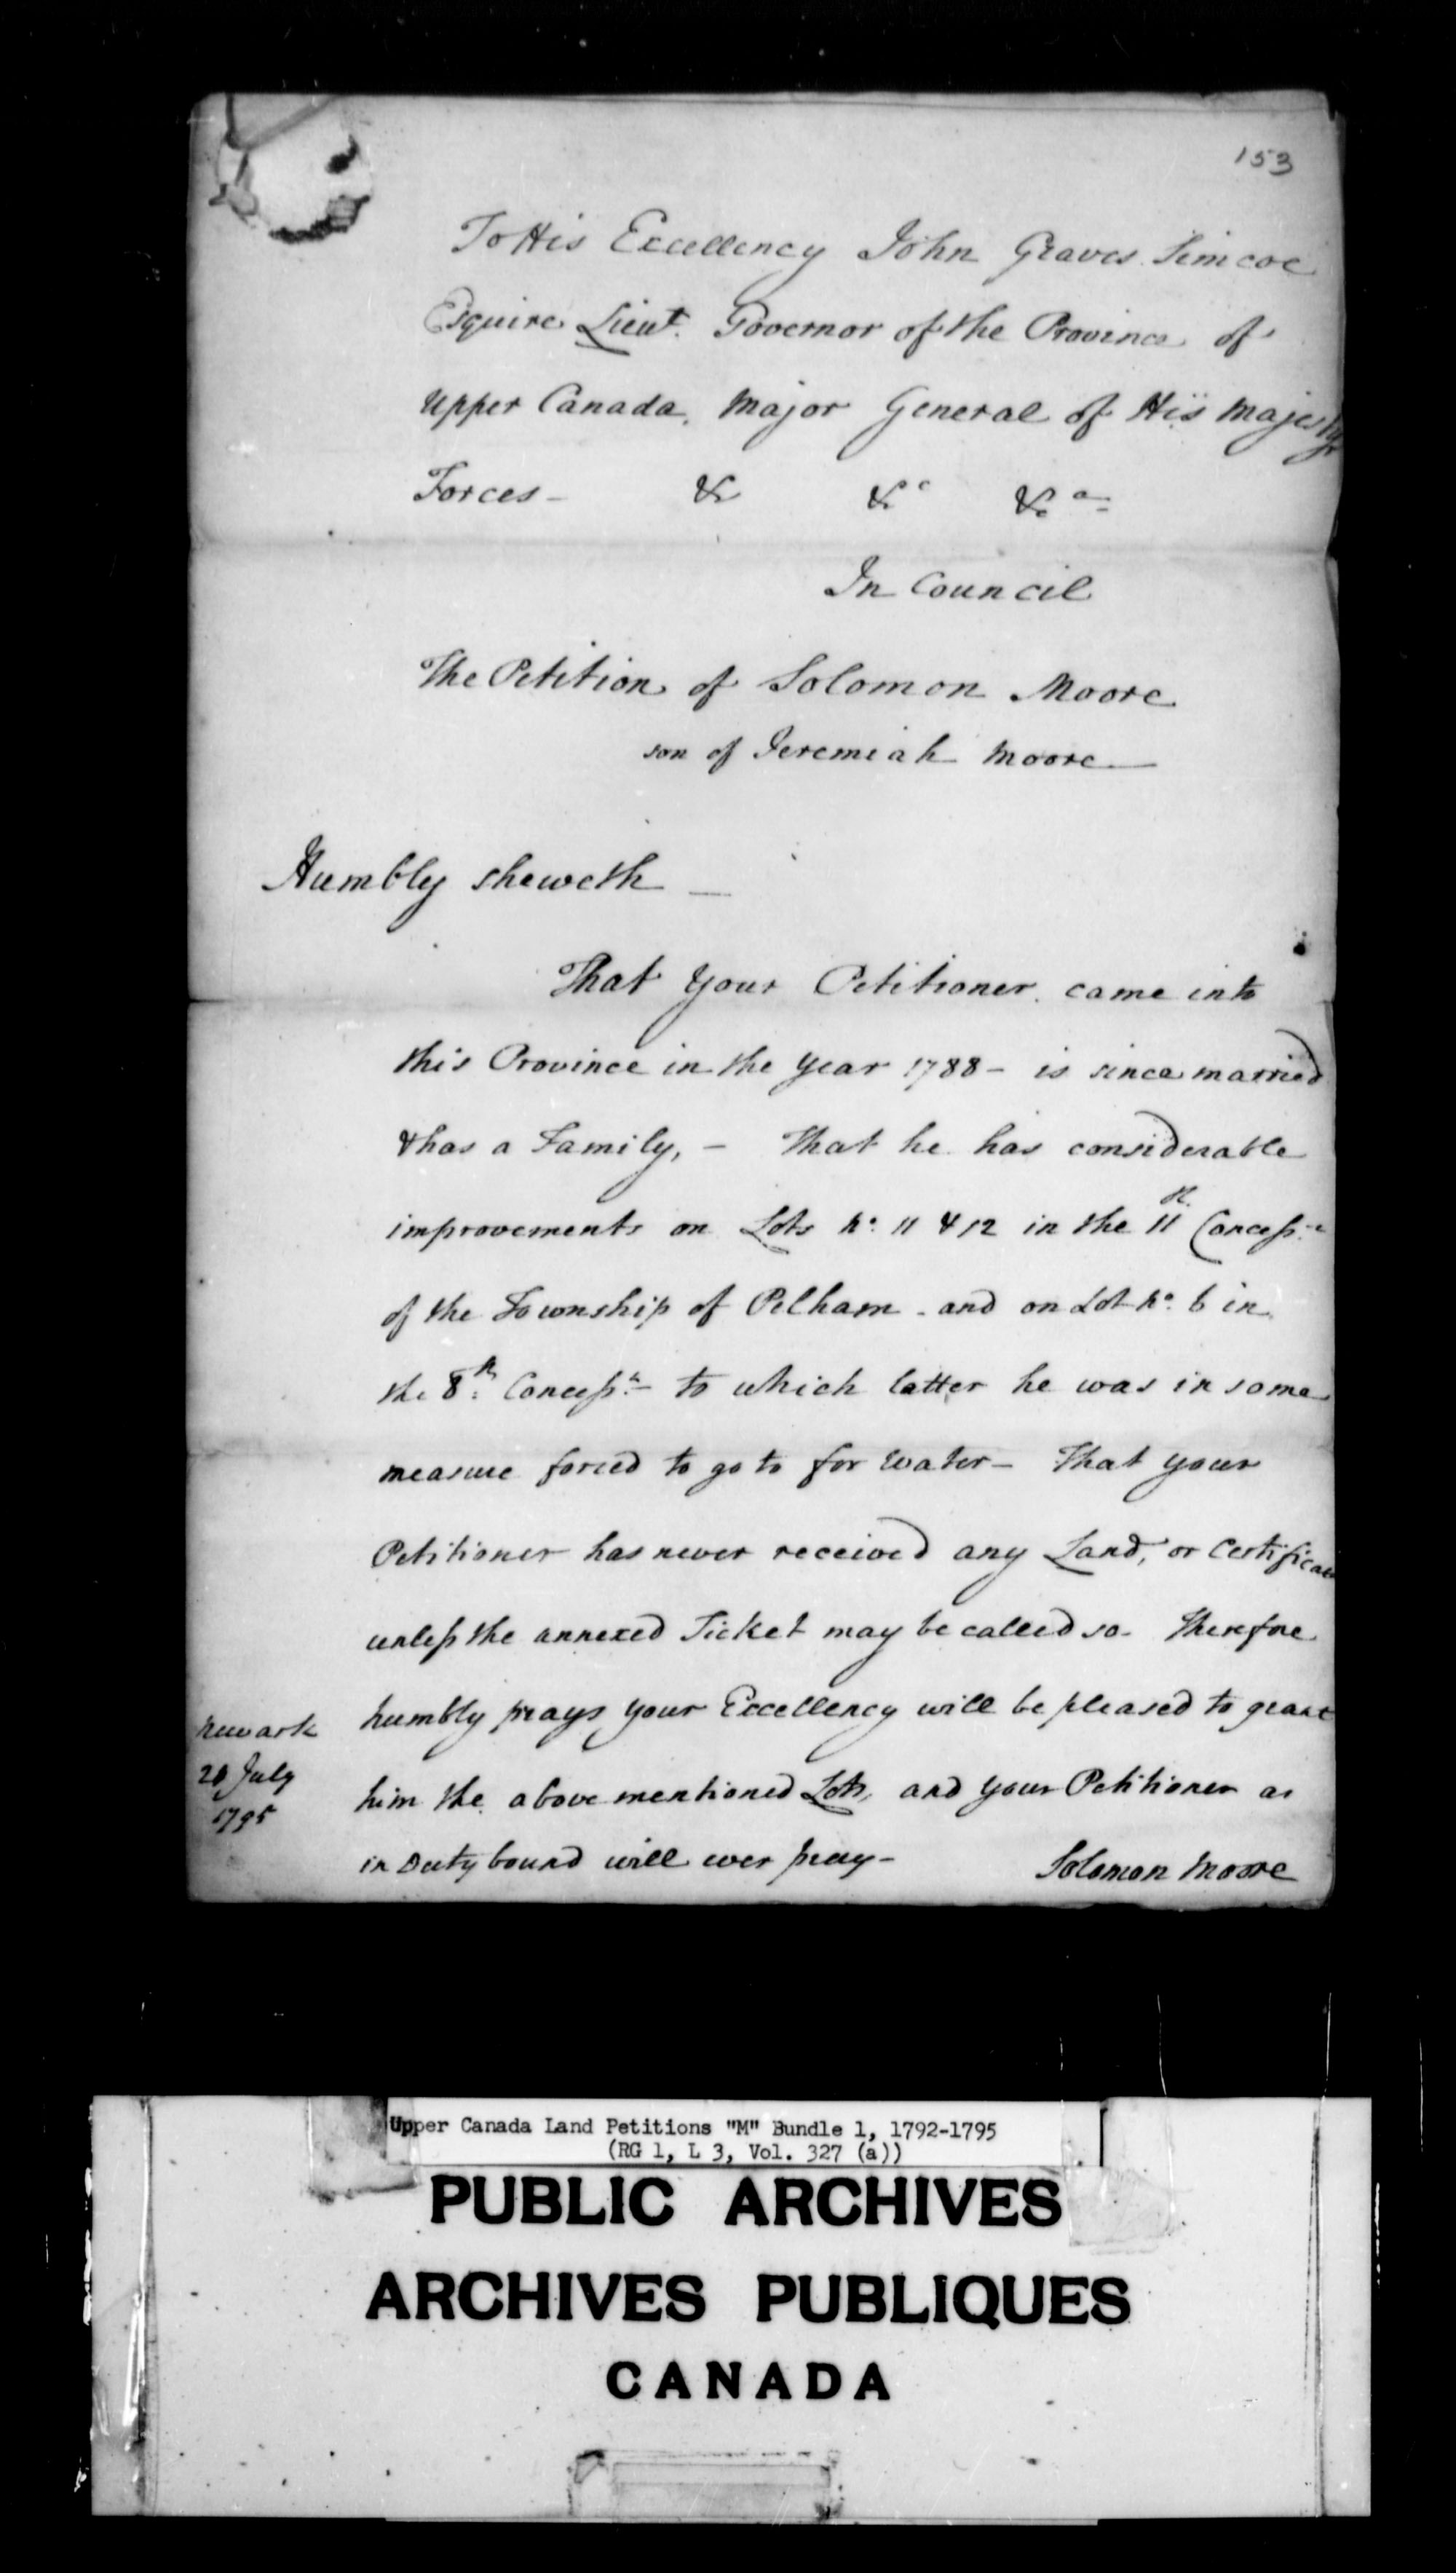 Title: Upper Canada Land Petitions (1763-1865) - Mikan Number: 205131 - Microform: c-2190